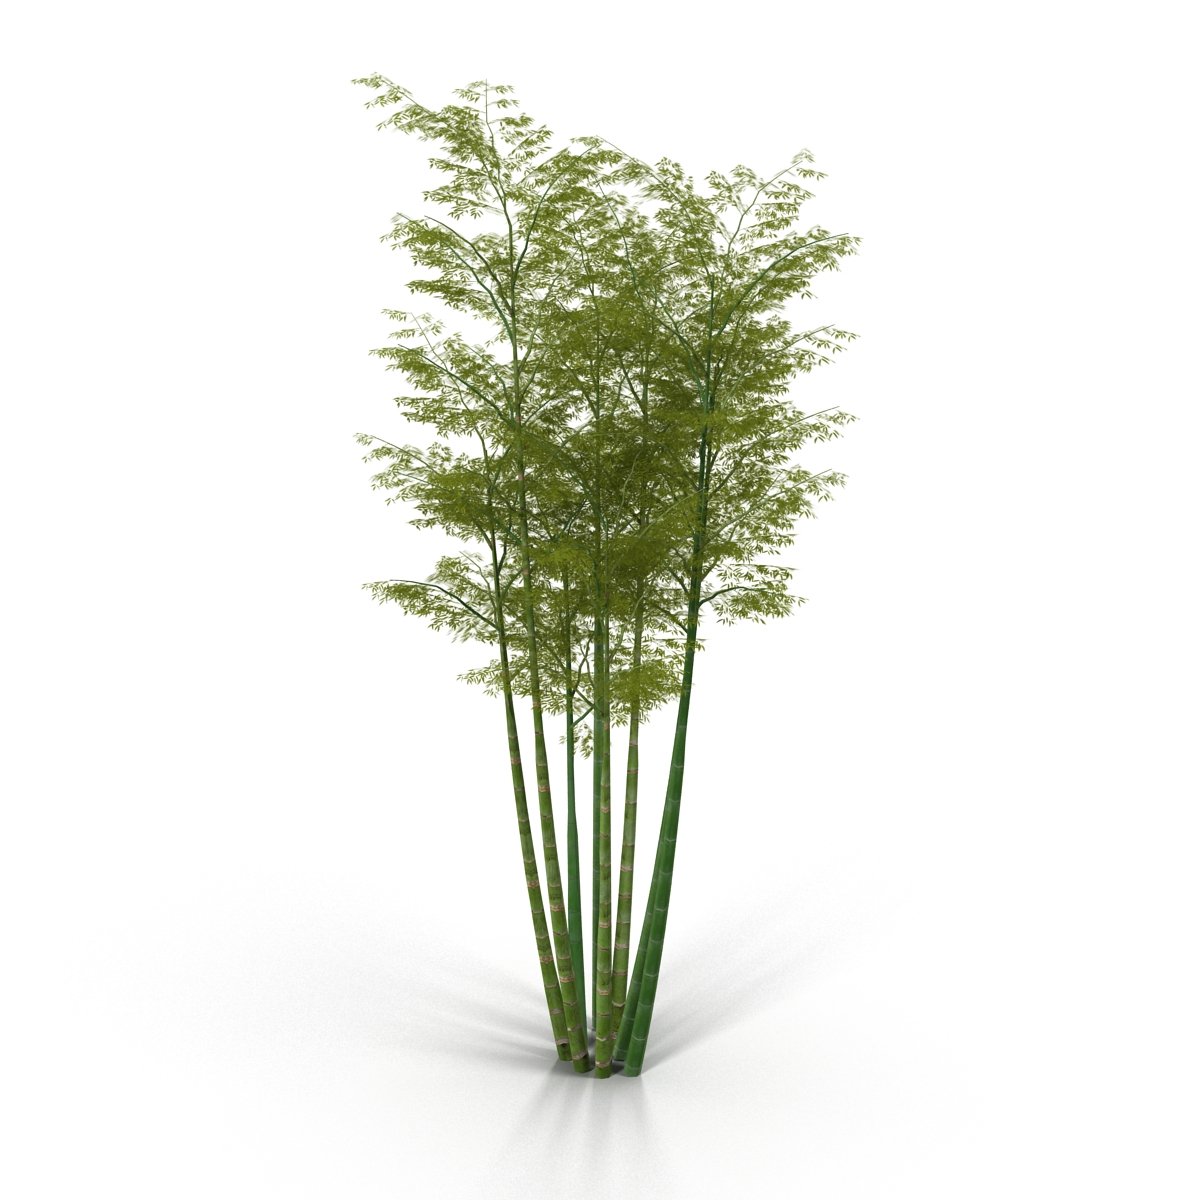 Bunch of green bamboo trees on a white background.